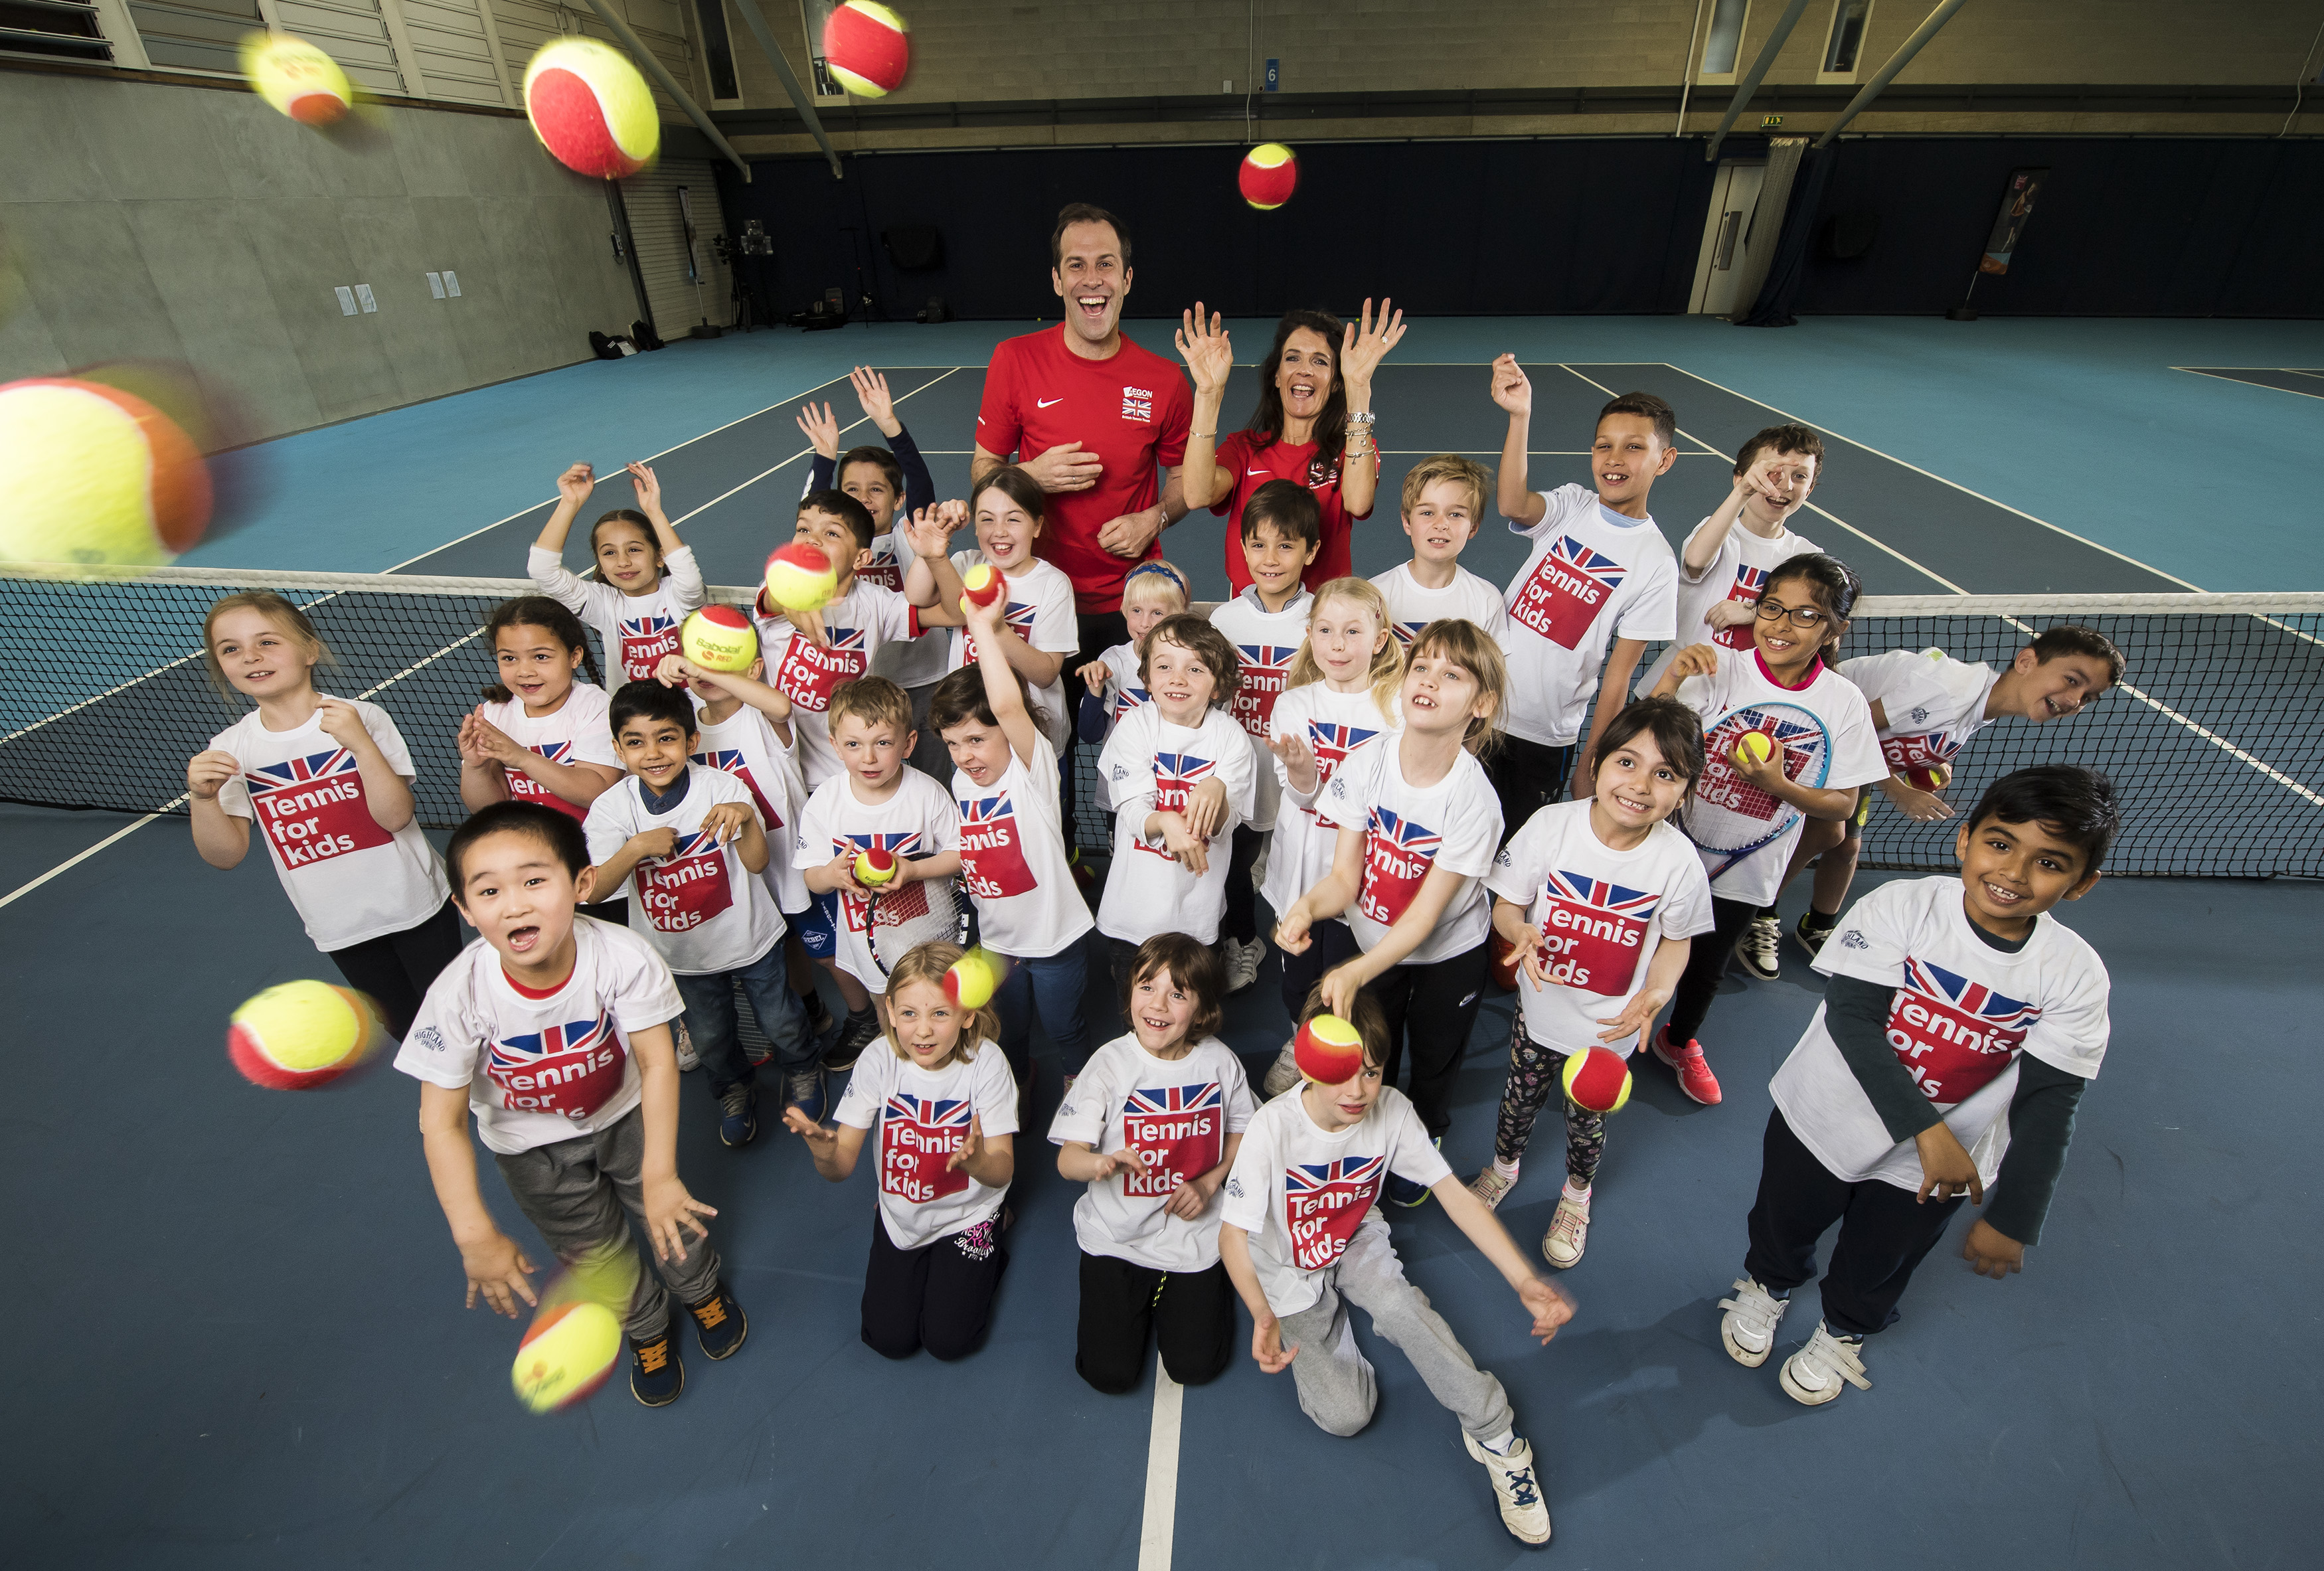 Greg Rusedski and Annabel Croft help out with Tennis for Kids